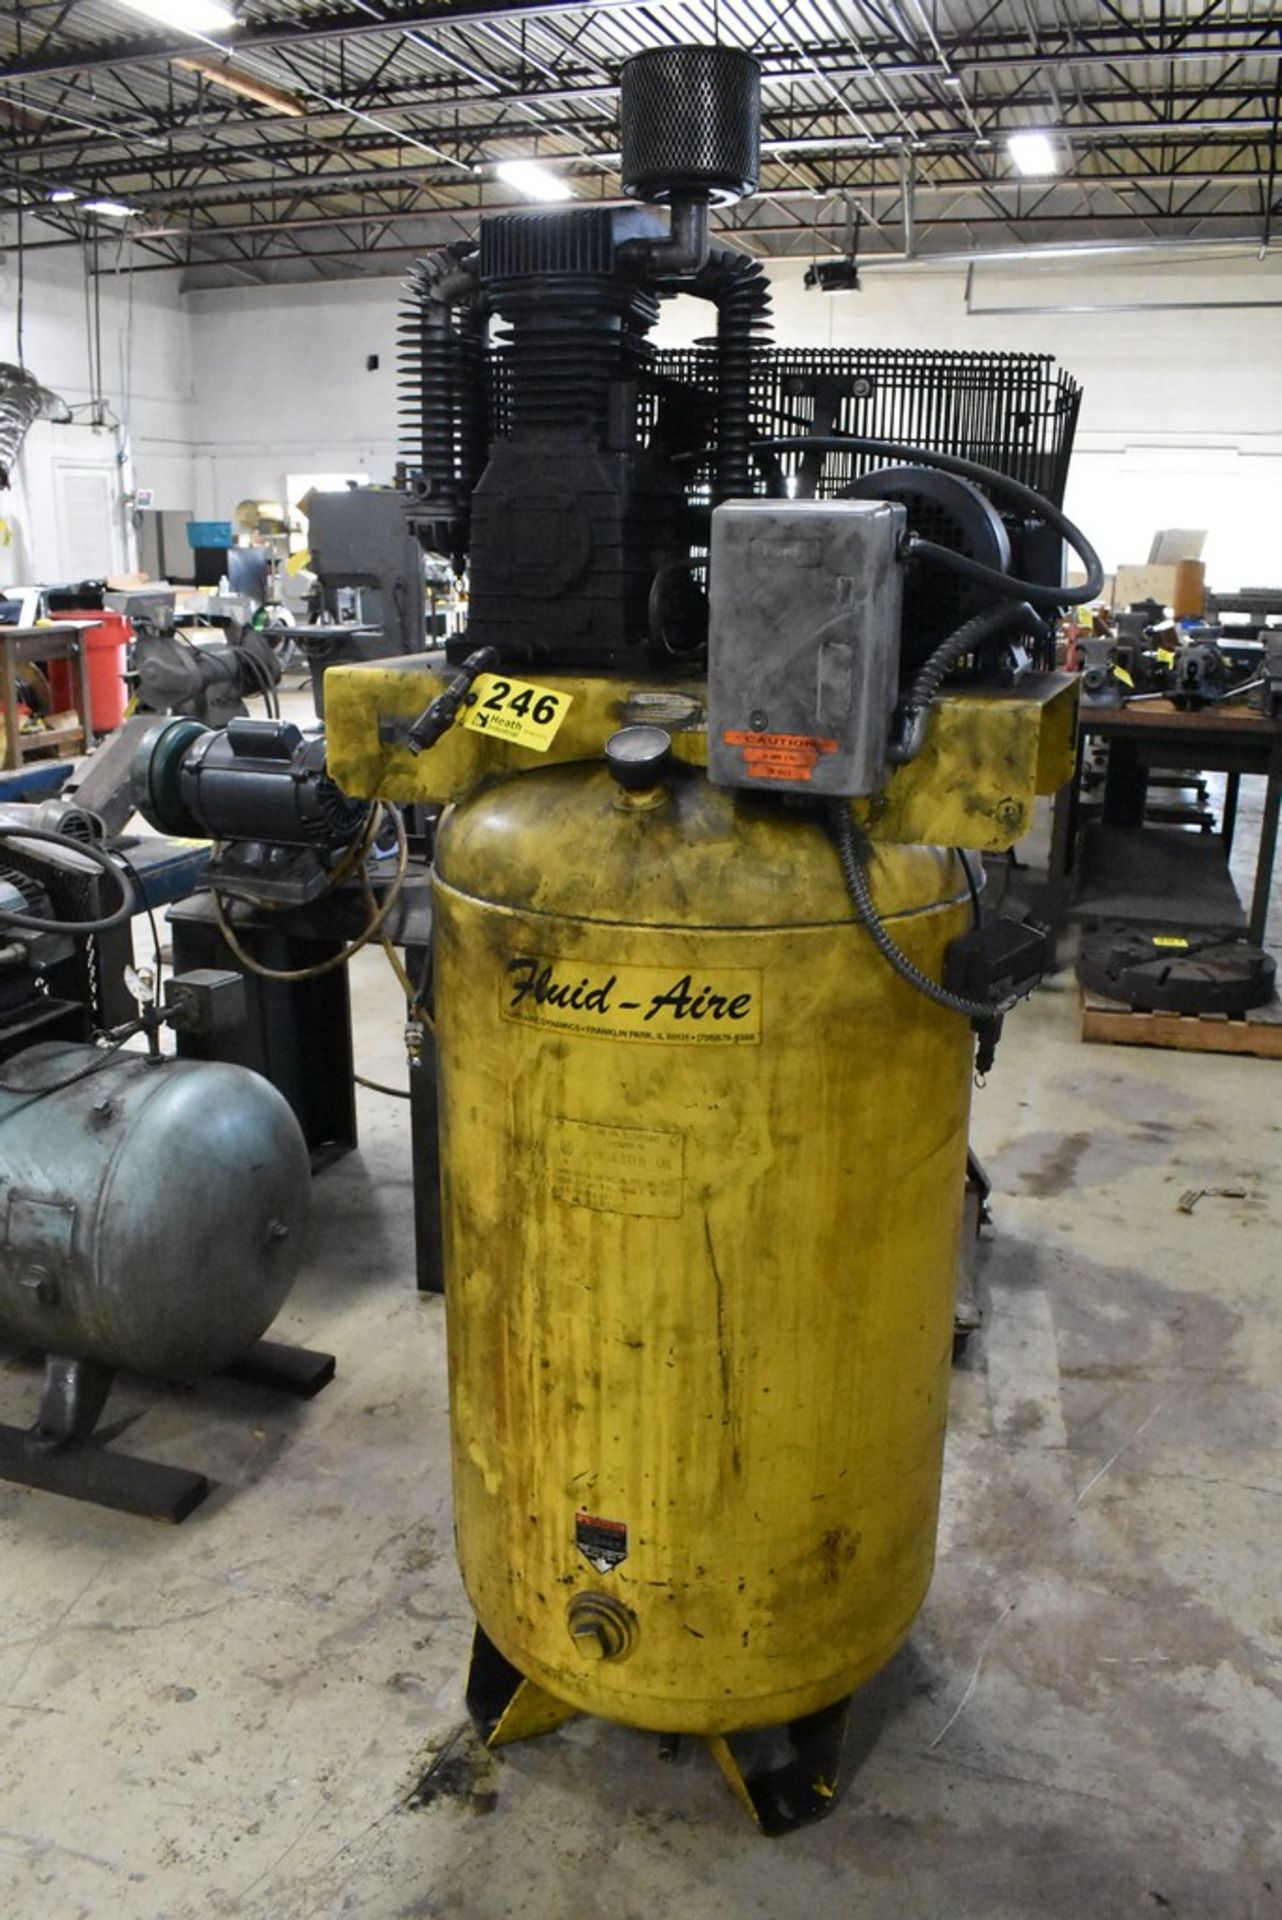 FLUID-AIRE 5HP VERTICAL TANK MOUNTED AIR COMPRESSOR 208/230V - Image 4 of 5